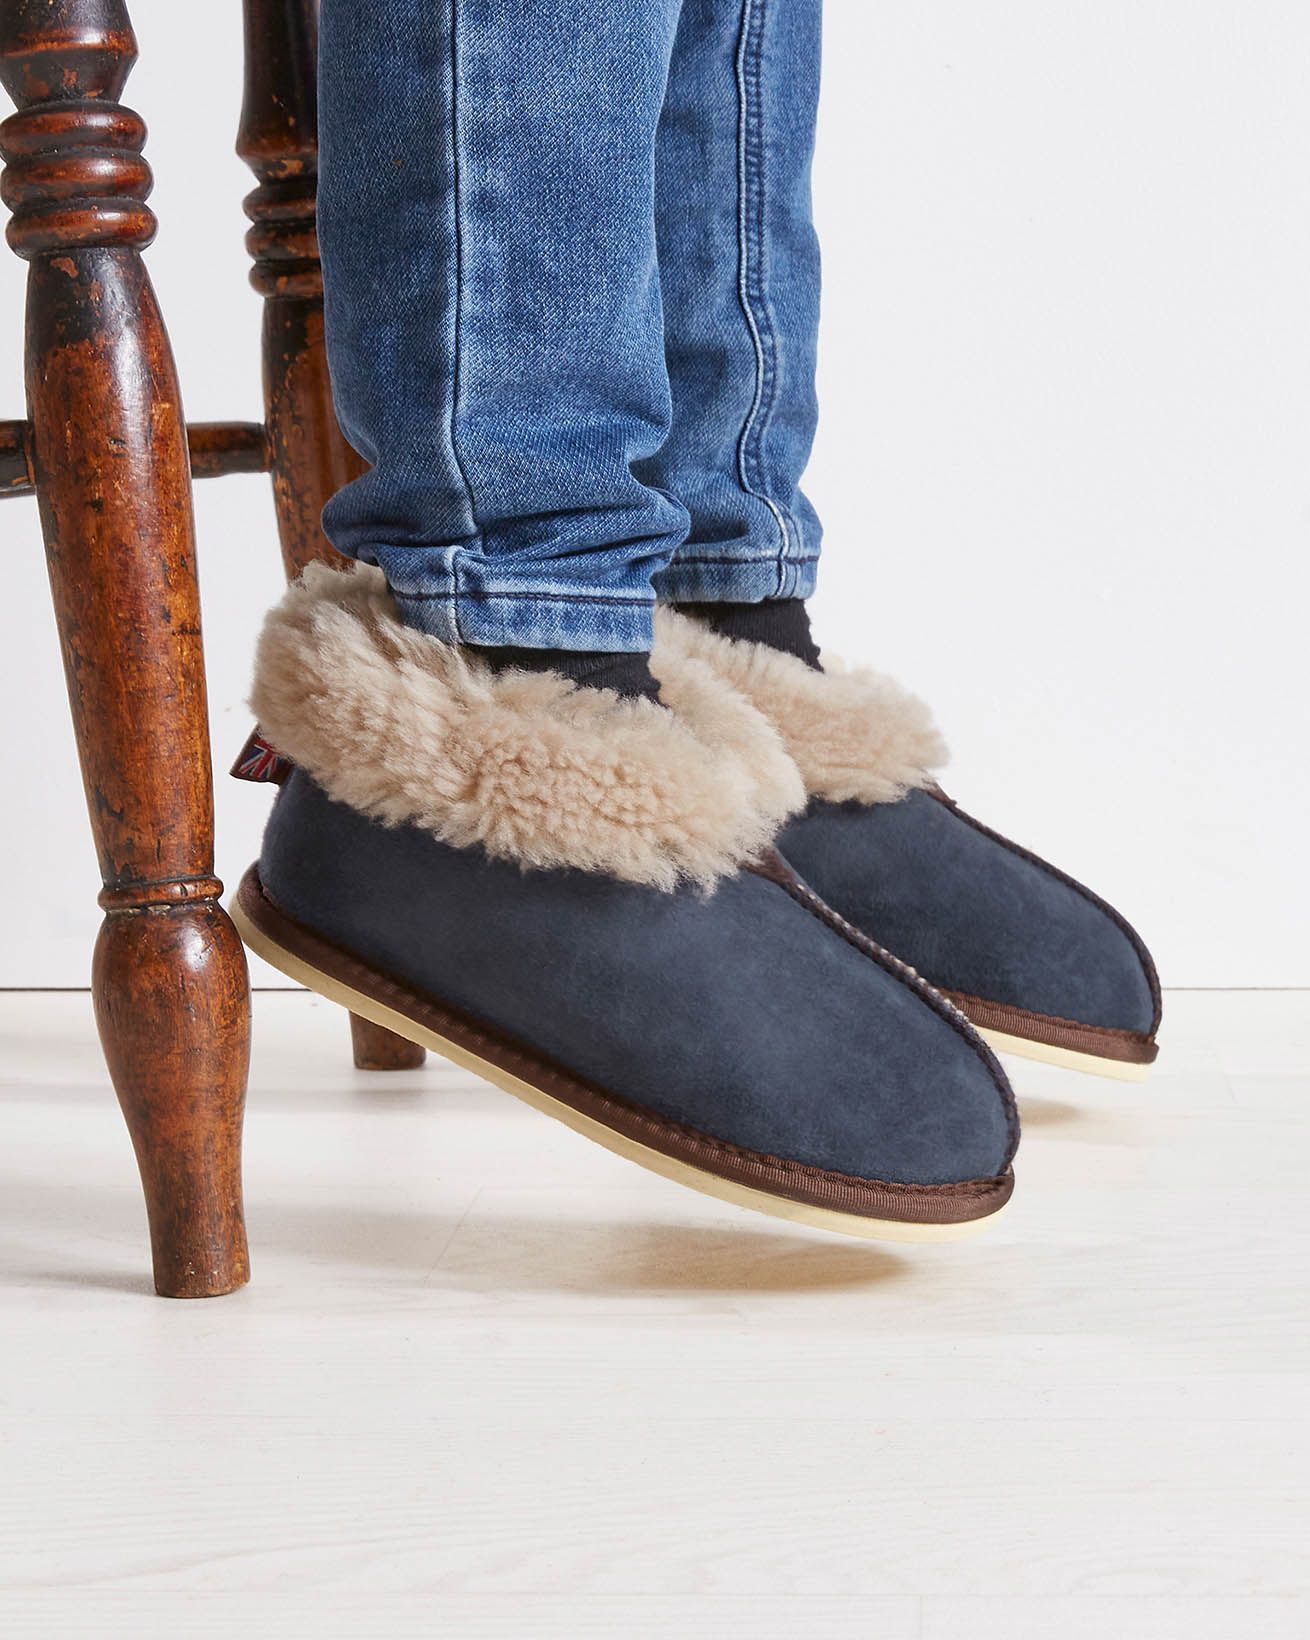 Mini Shearling Slippers - Bootees